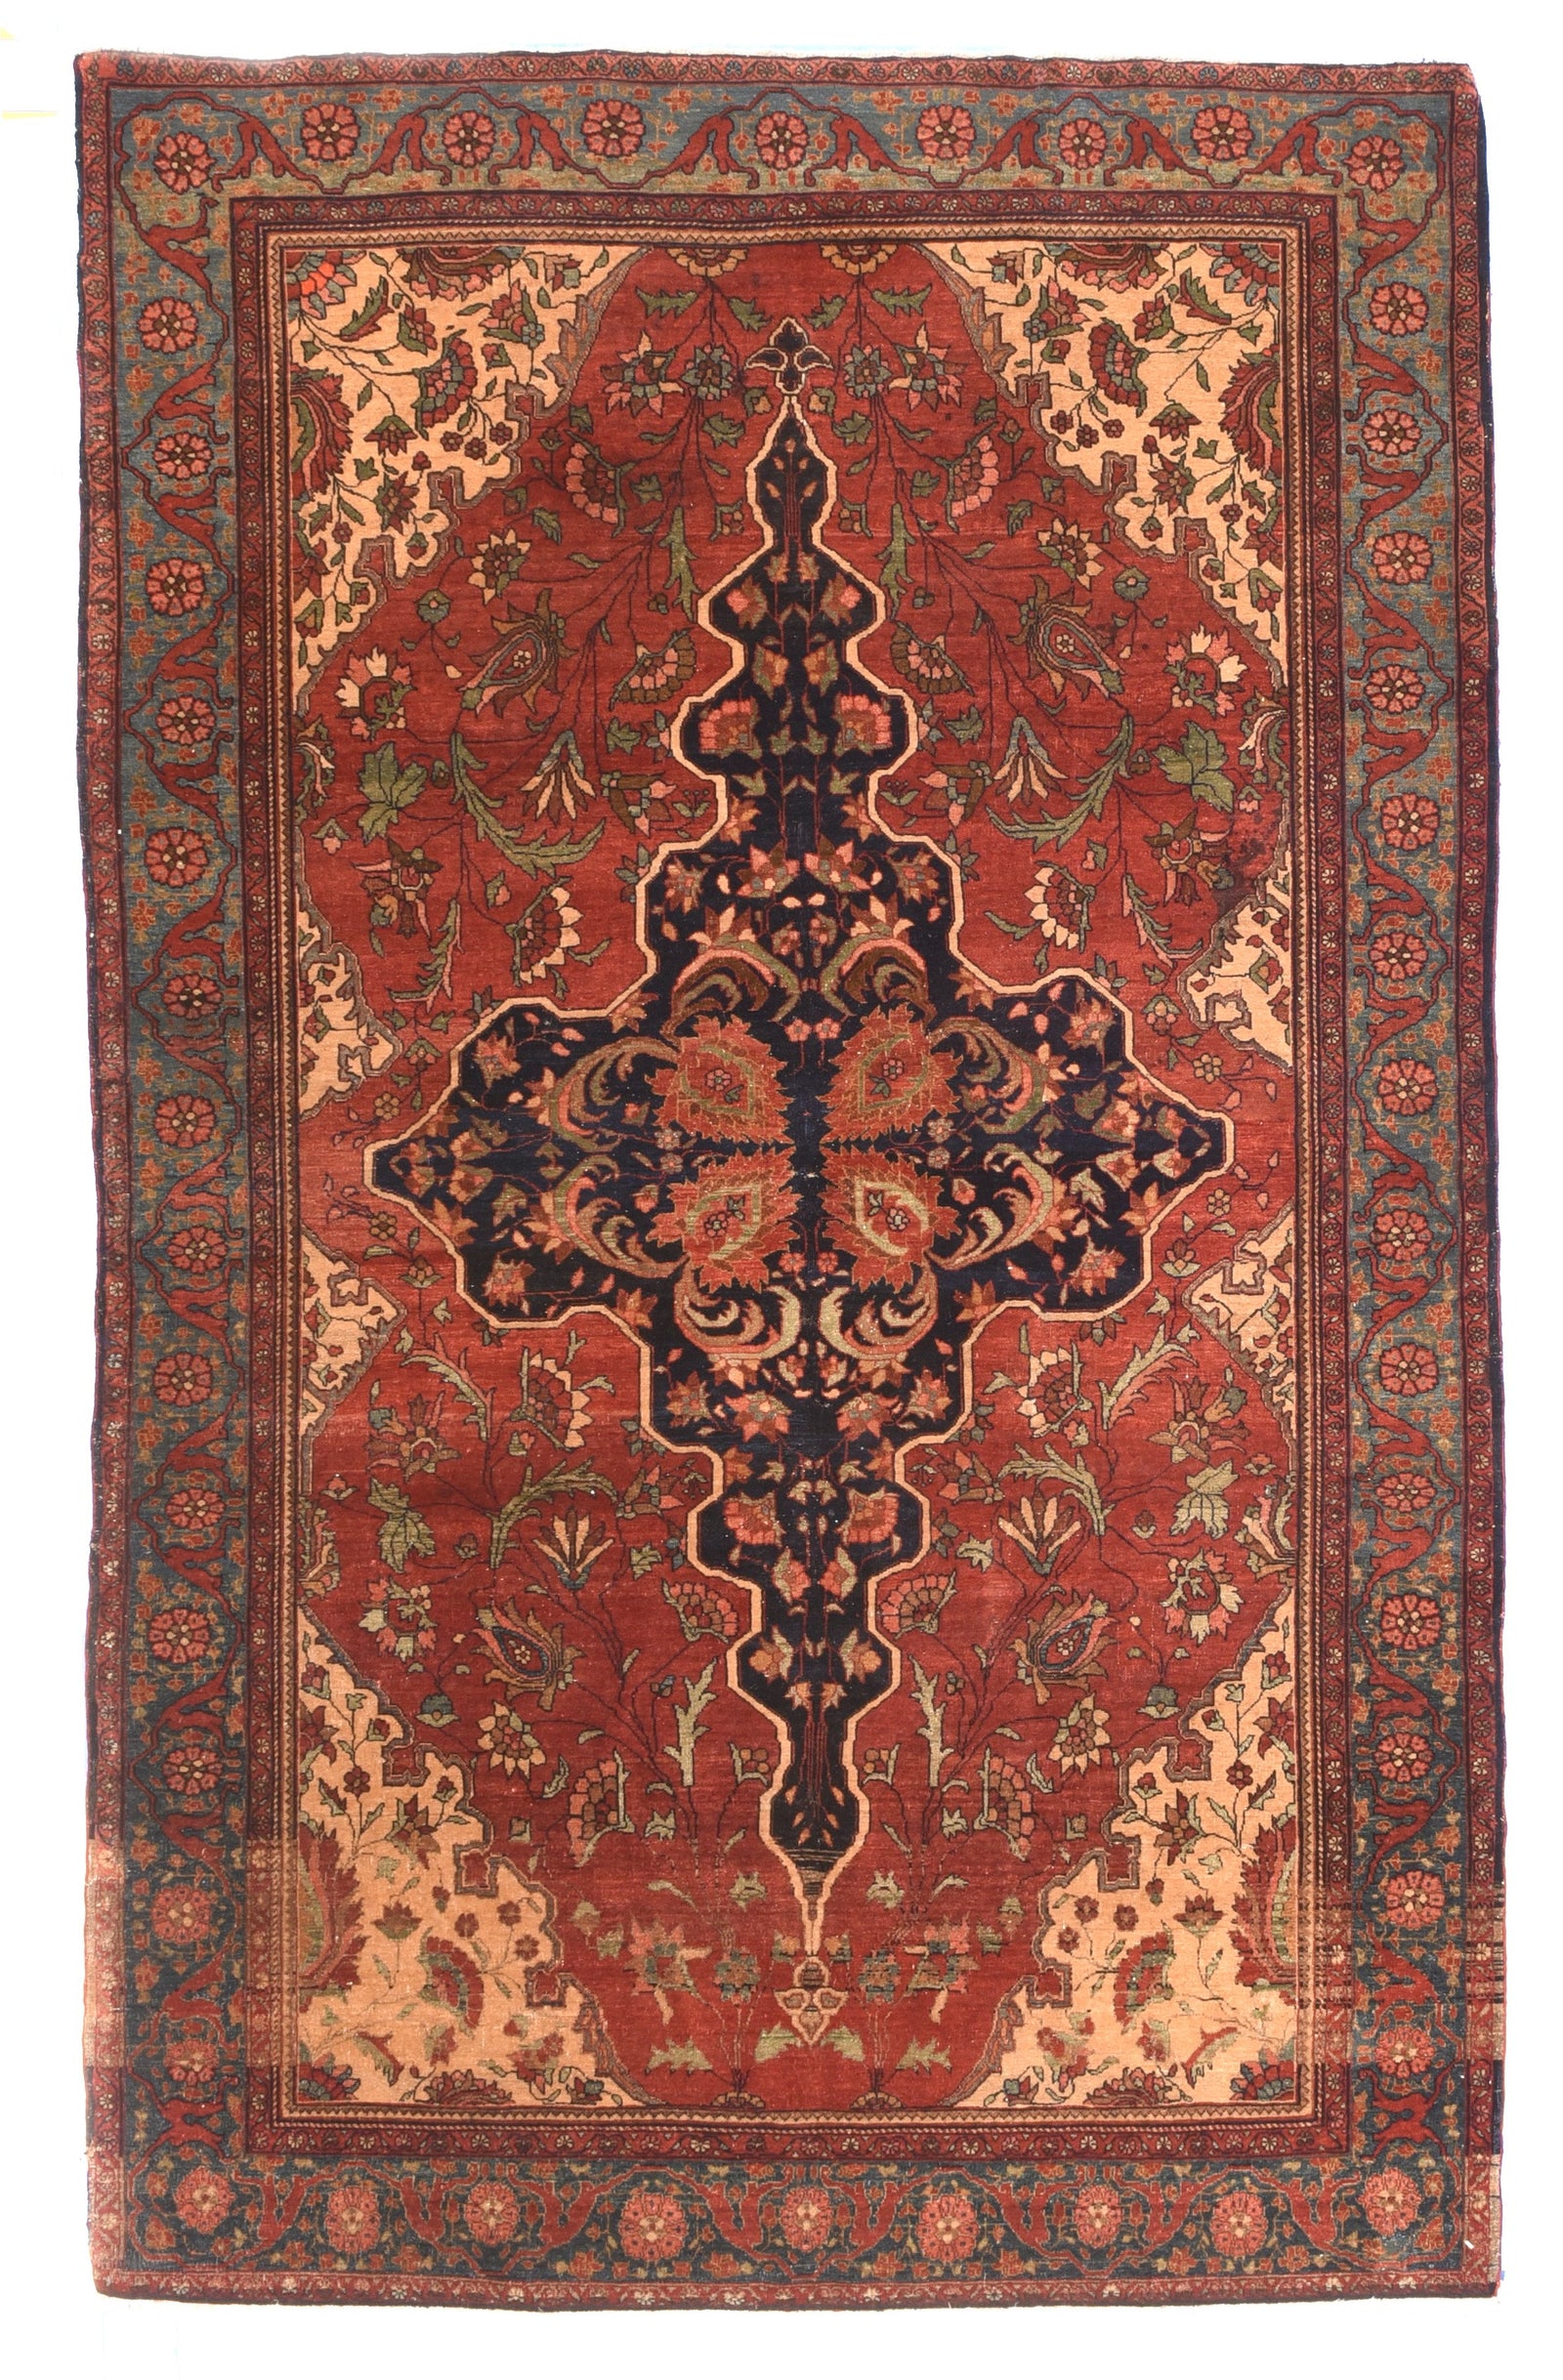 Antique Red Farahan Persian Area Rug